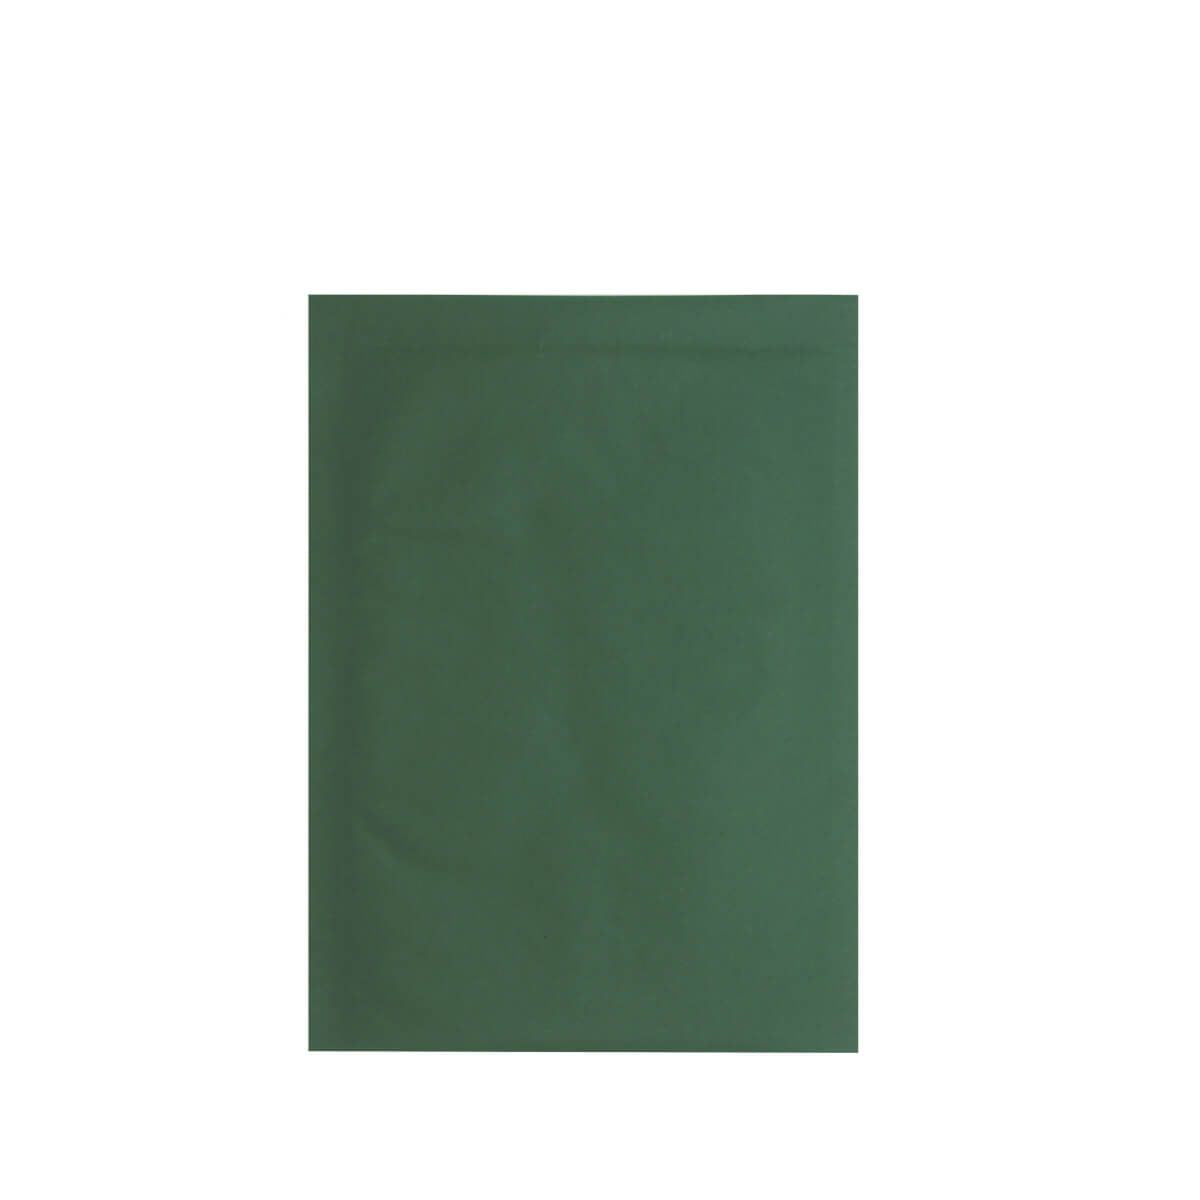 215mm x 150mm Eco Friendly Recyclable Dark Green Padded Envelope [Qty 100] - All Colour Envelopes